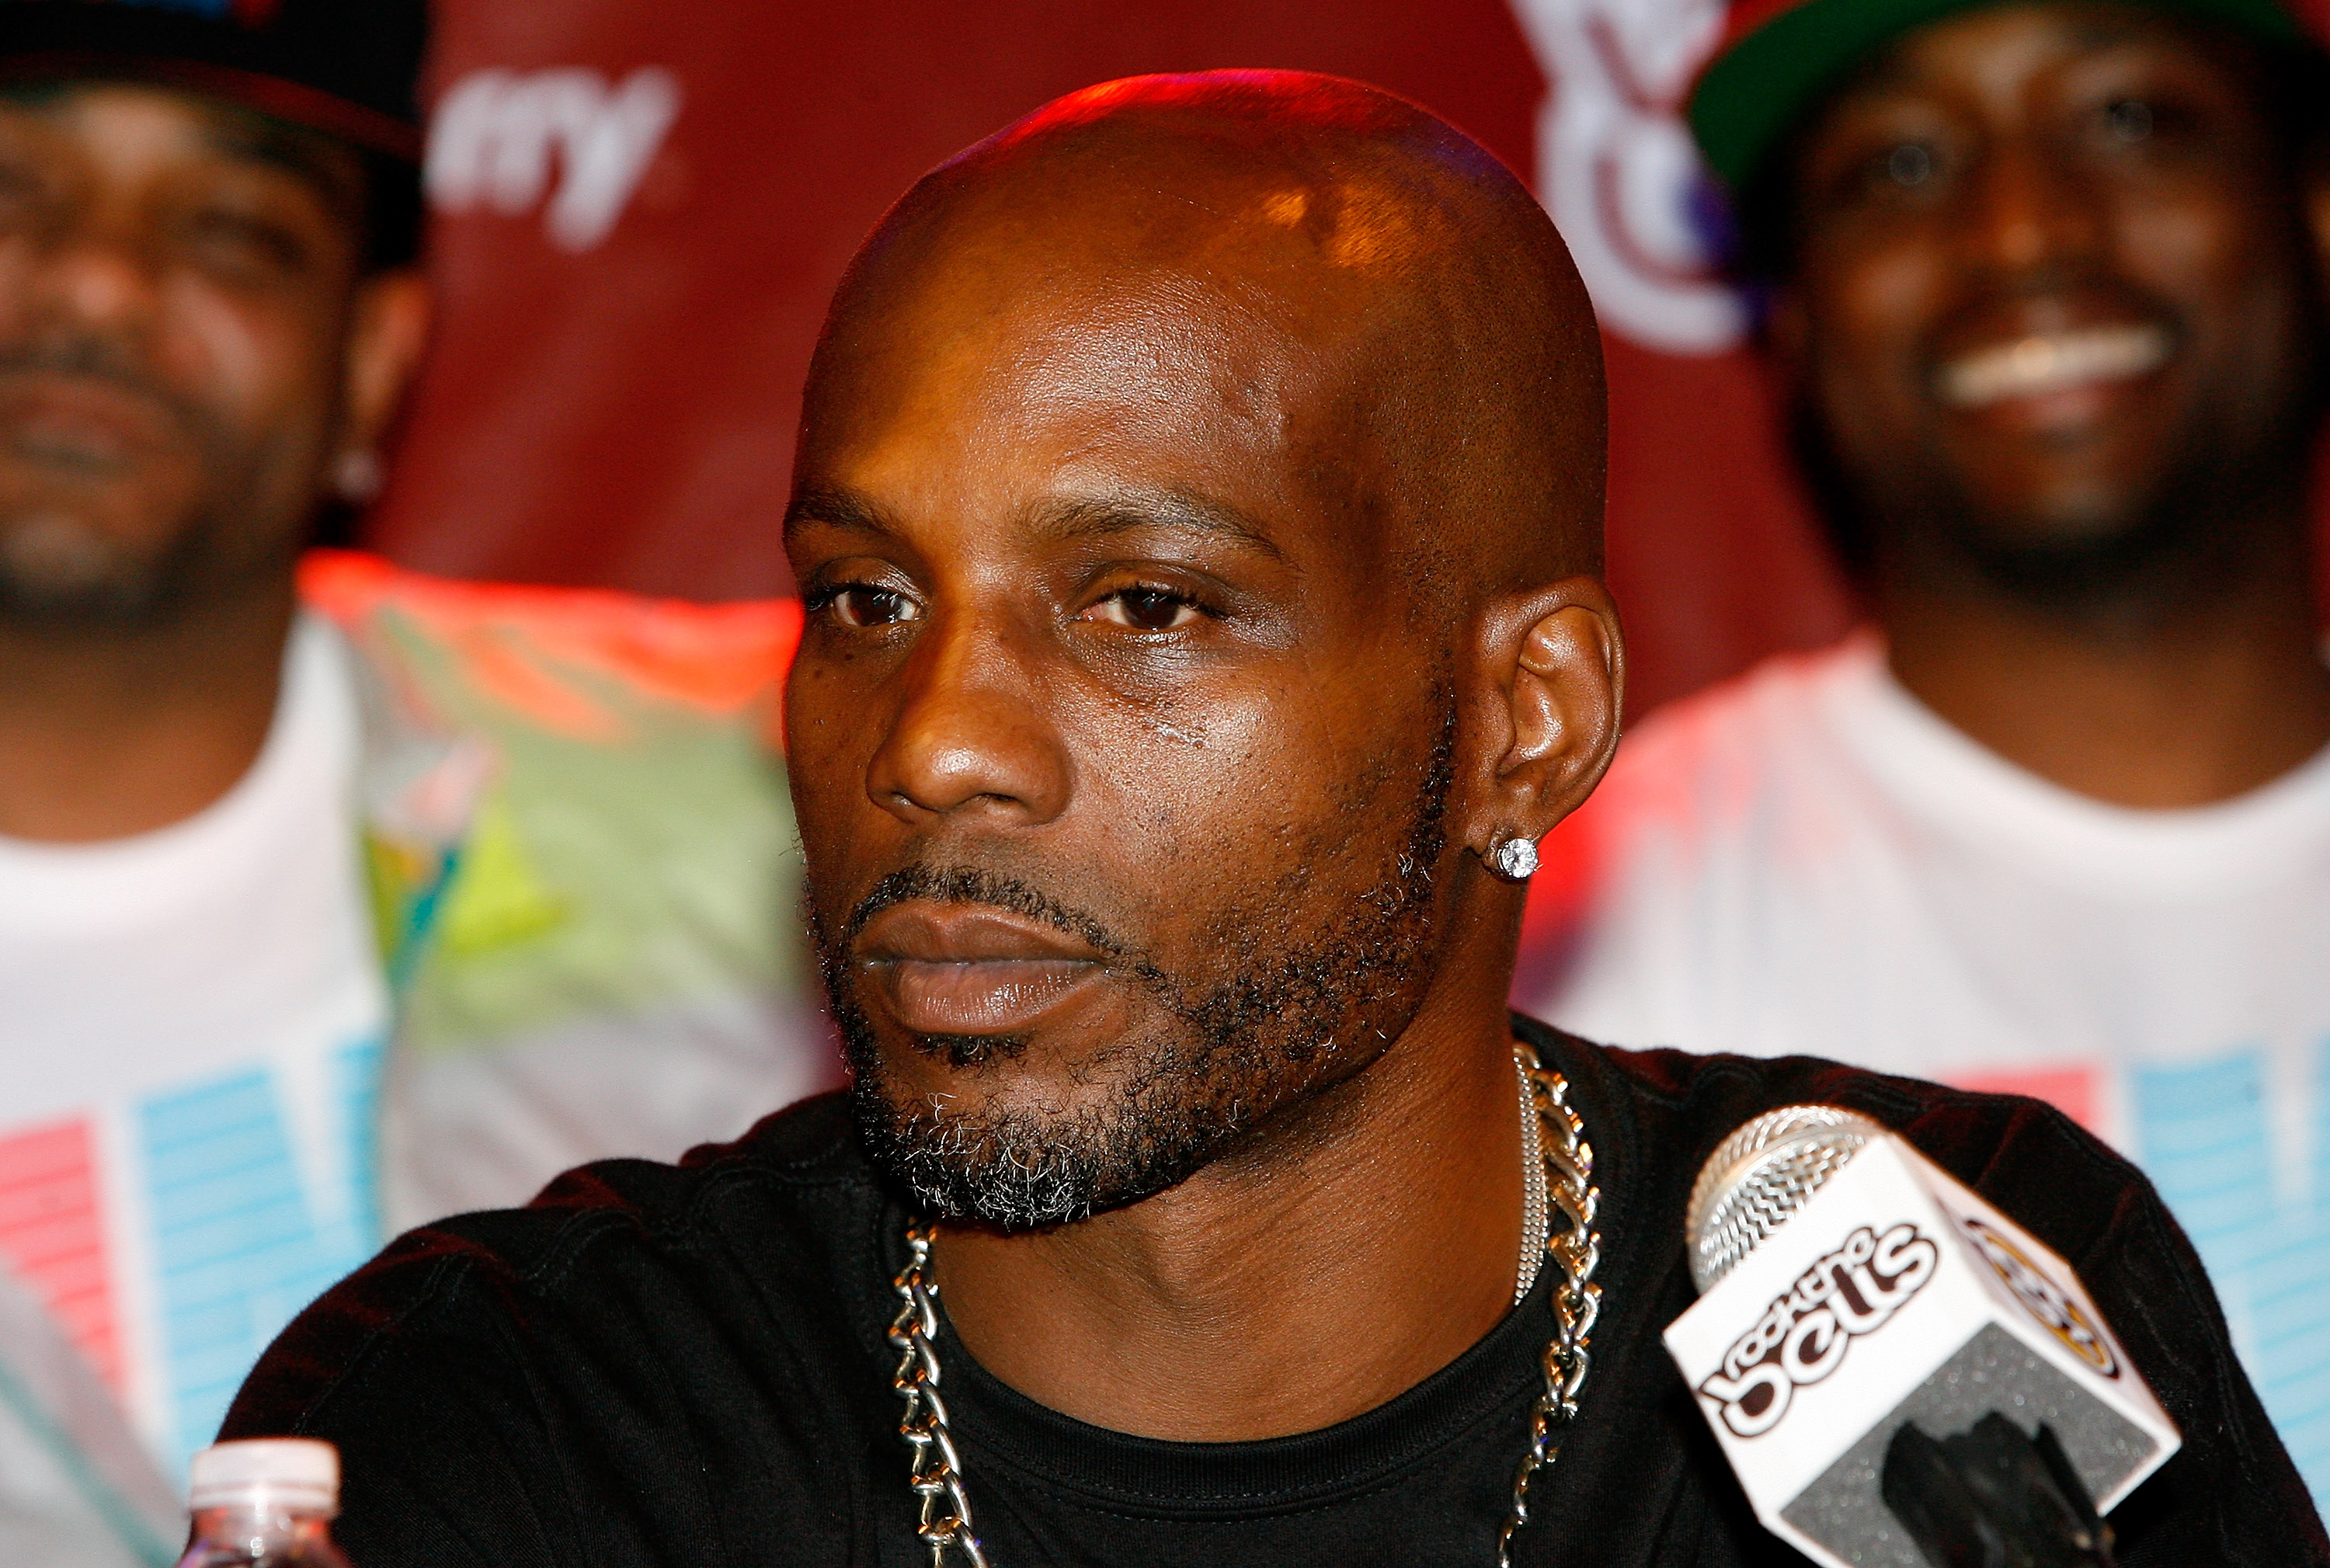  Rapper DMX speaks during the 2012 Rock the Bells Festival press conference and Fan Appreciation Party on at Santos Party House on June 13, 2012 in New York City. 